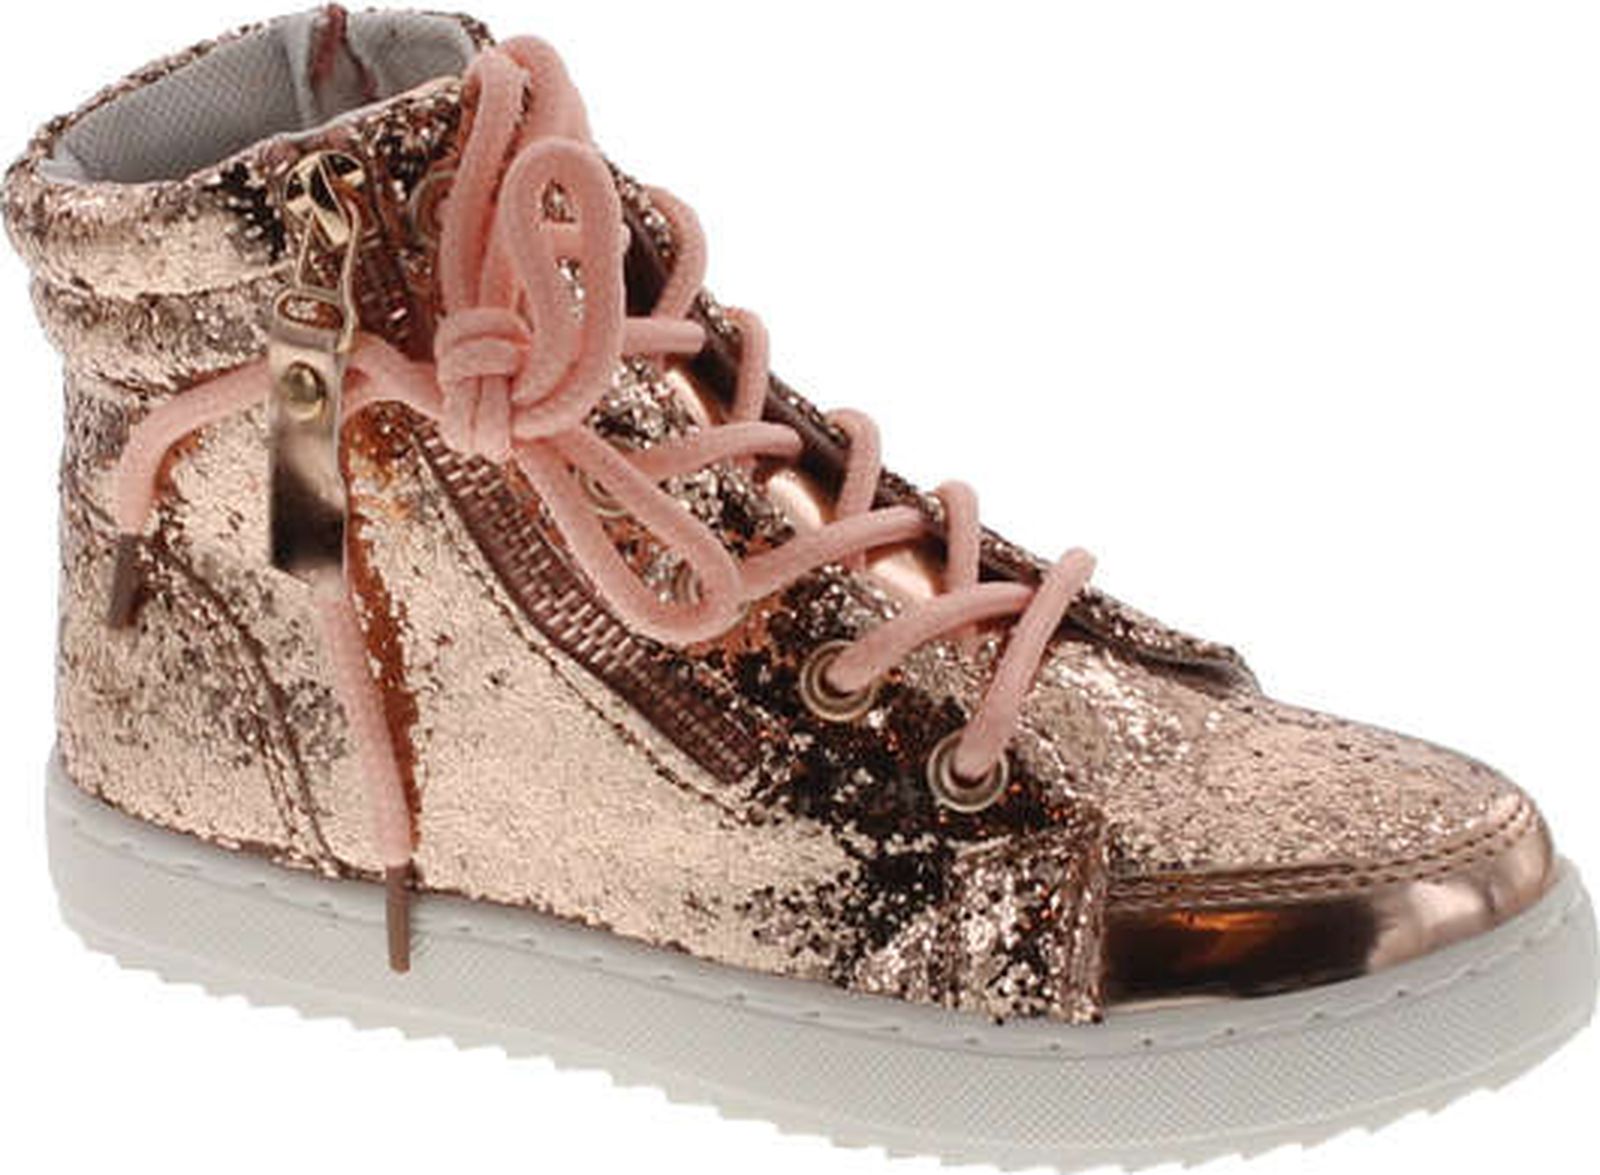 Link Ultra-69K Girl's Glitter Lace Up White Sole Ankle High Top Street Sneakers, Rose Gold, 9 - image 1 of 4